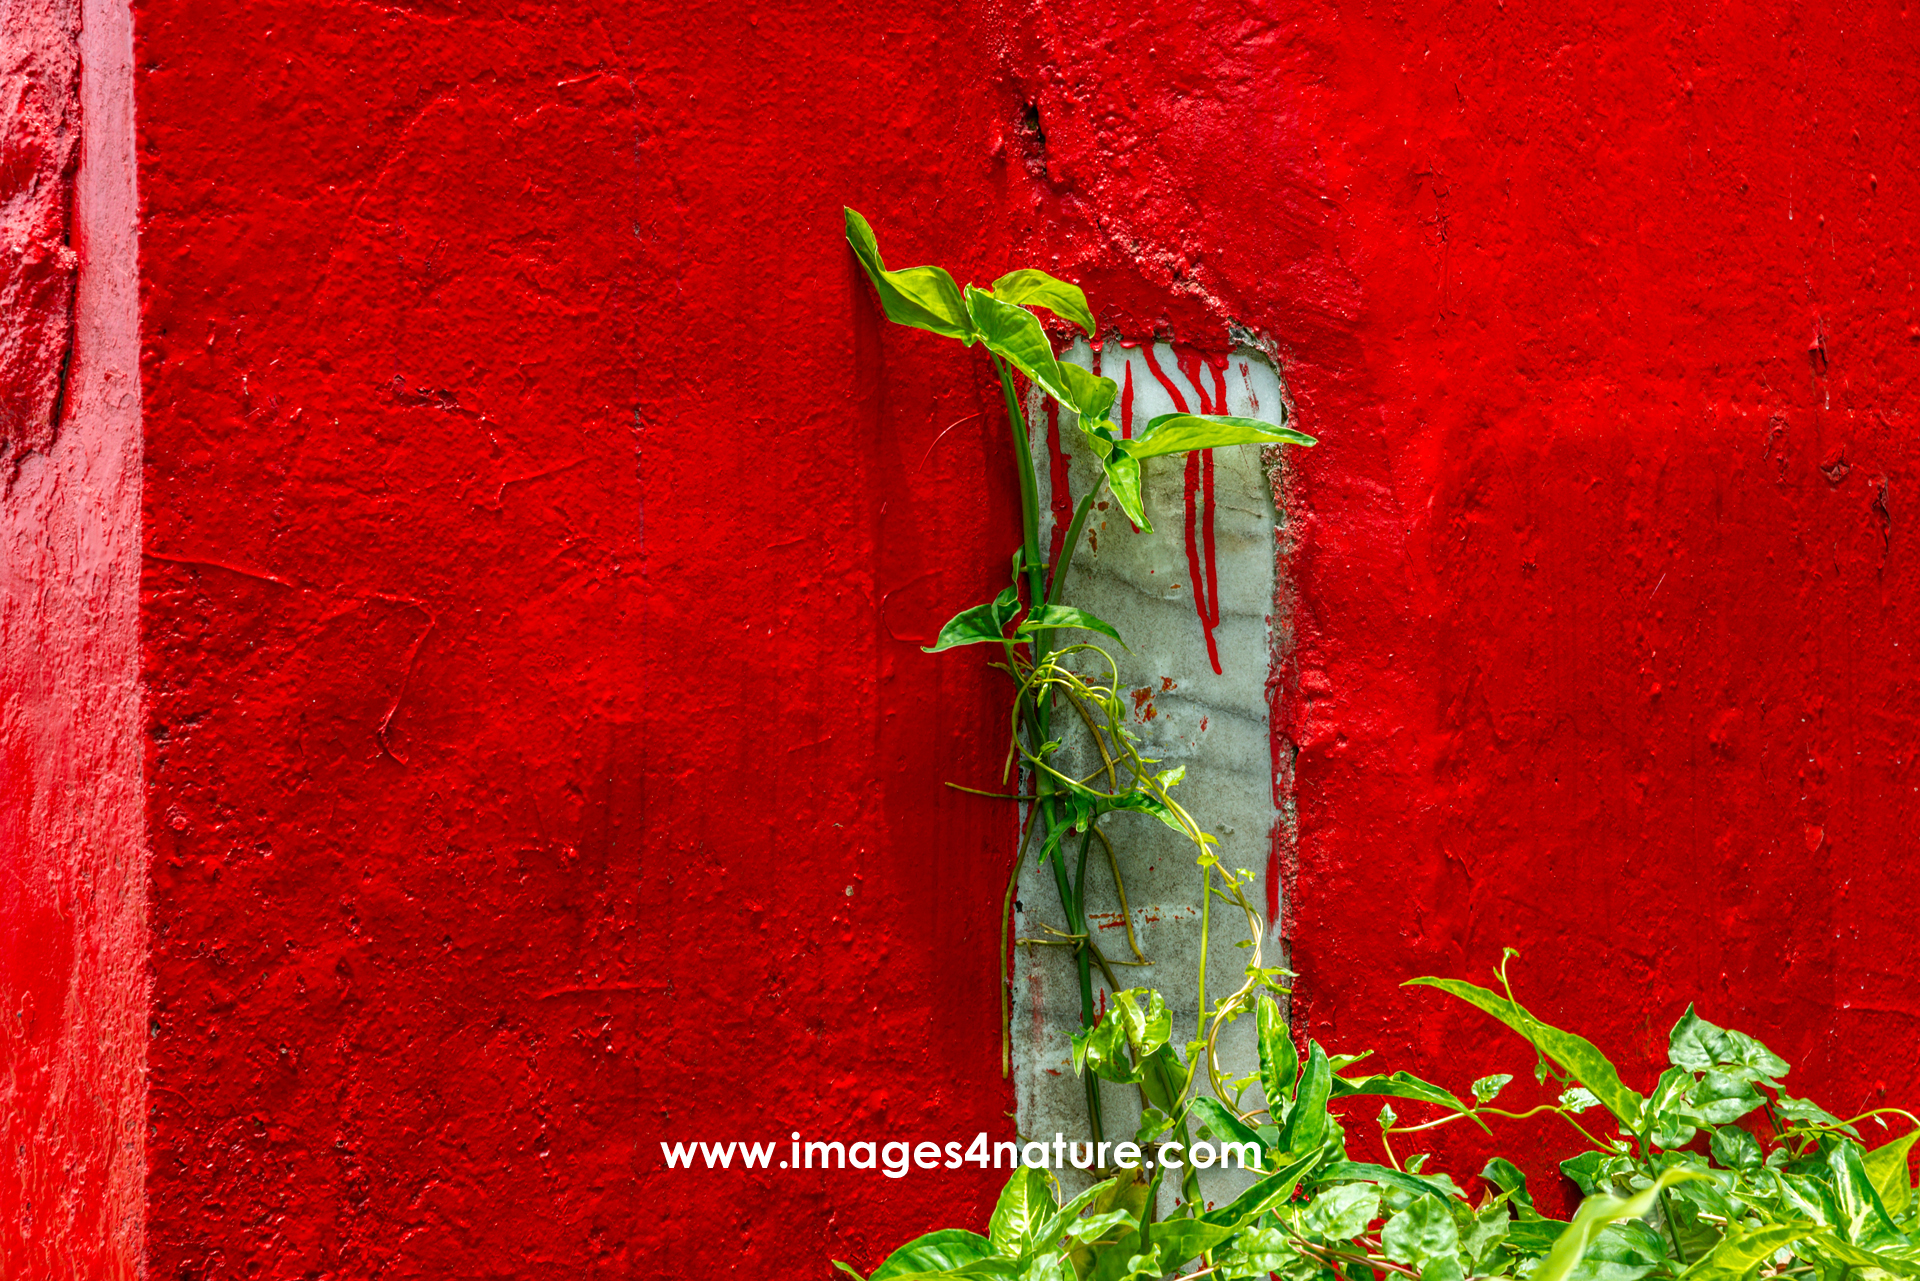 Rustic wall in bright red color with a green plant climbing up within a non-painted white area